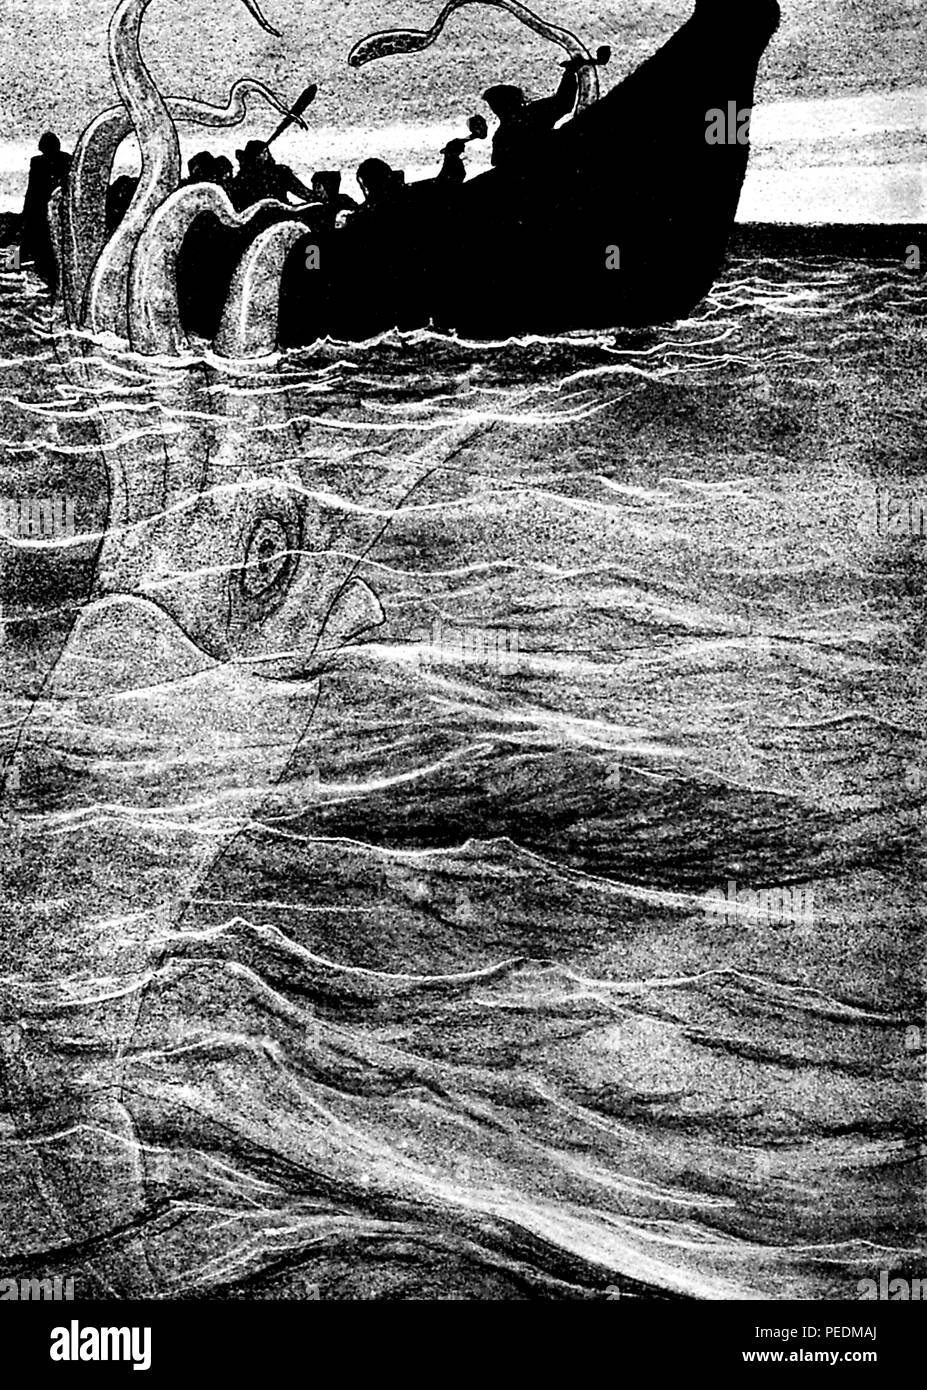 Black and white illustration depicting the Kraken, a legendary, giant, squid-like sea monster, attacking a rowboat full of people, from the serial 'St Nicholas, ' volume XLVII, authored by Mary Mapes Dodge, and published in New York by The Century Company, 1873. Courtesy Internet Archive. () Stock Photo